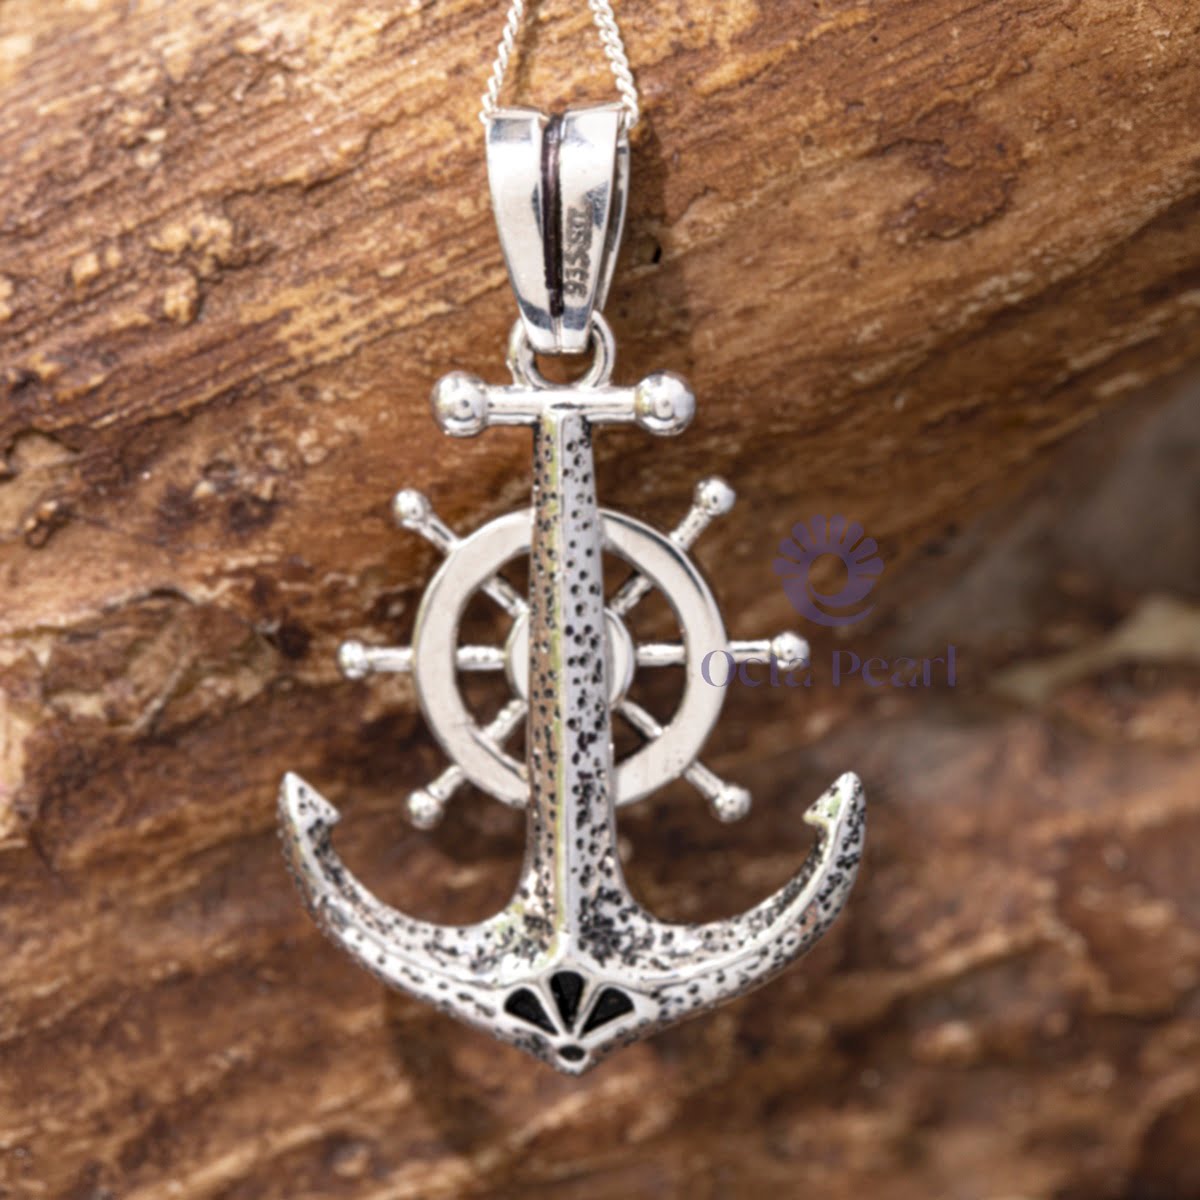 Men’s Nautical Marine Anchor With Compass Without Chain Handmade Pendant